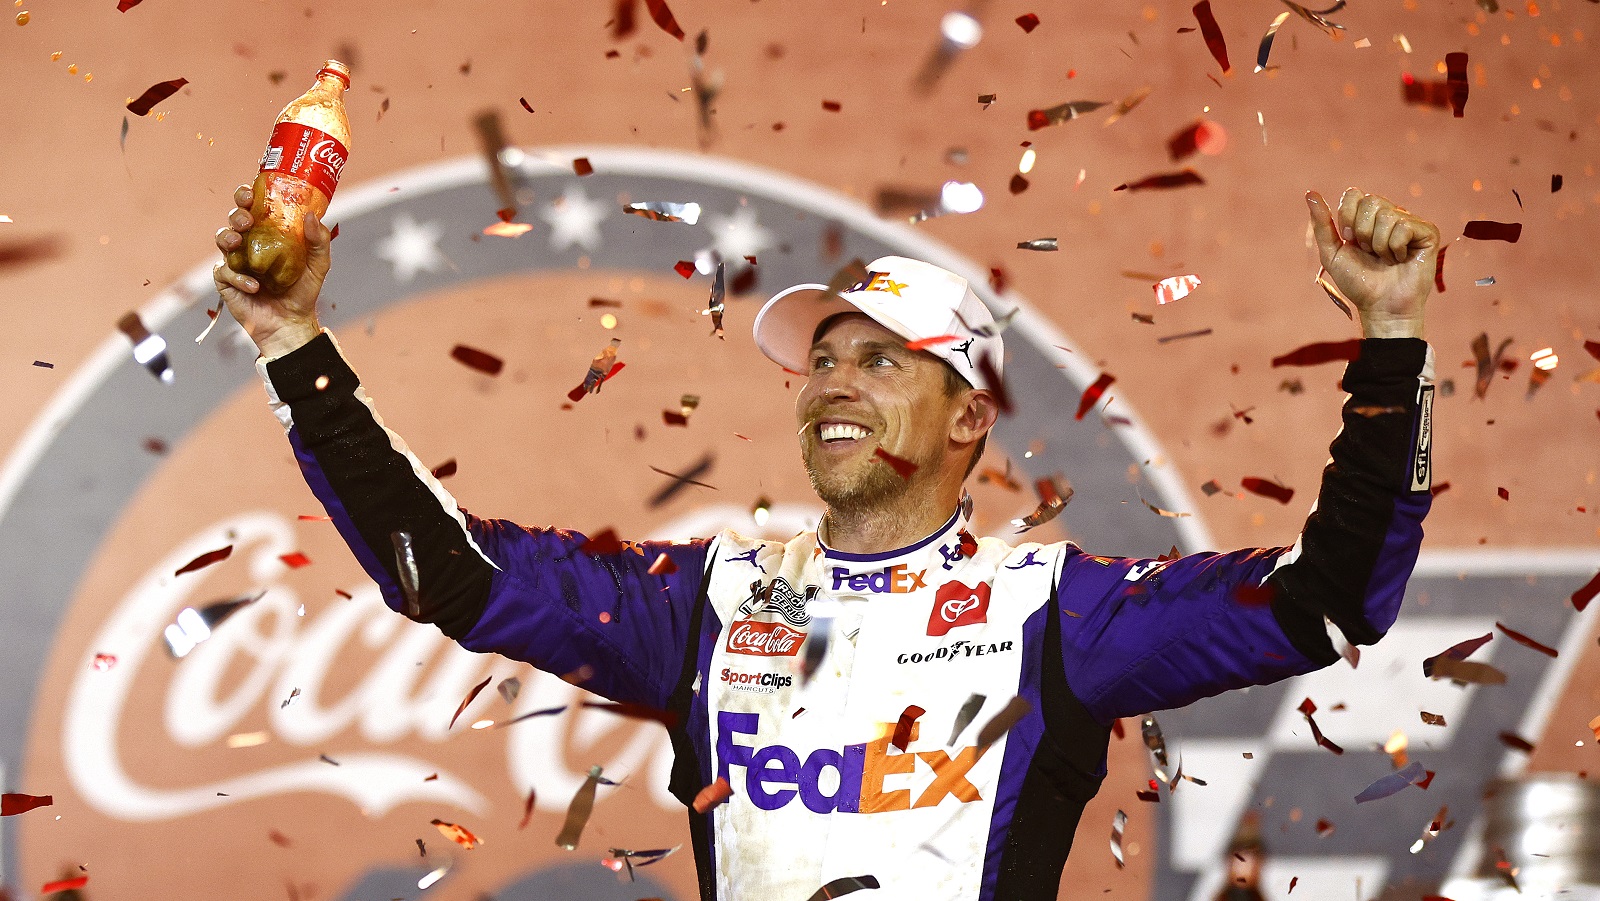 Denny Hamlin, driver of the No. 11 Toyota, celebrates after winning the NASCAR Cup Series Coca-Cola 600 at Charlotte Motor Speedway on May 29, 2022. | Jared C. Tilton/Getty Images